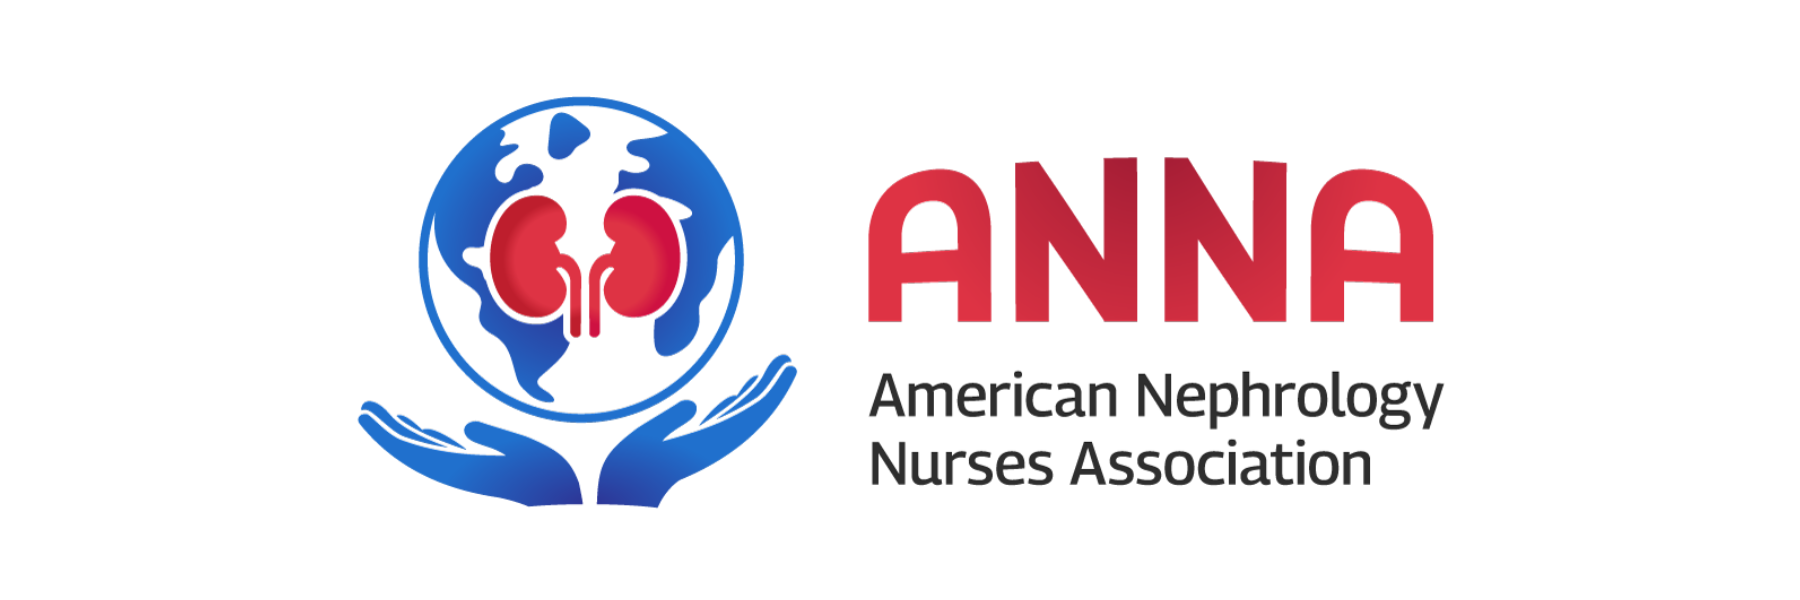 ANNA's New Logo a pair of kidneys surrounded by a globe being held aloft by a set of hands, ANNA, American Nephrology Nurses Association